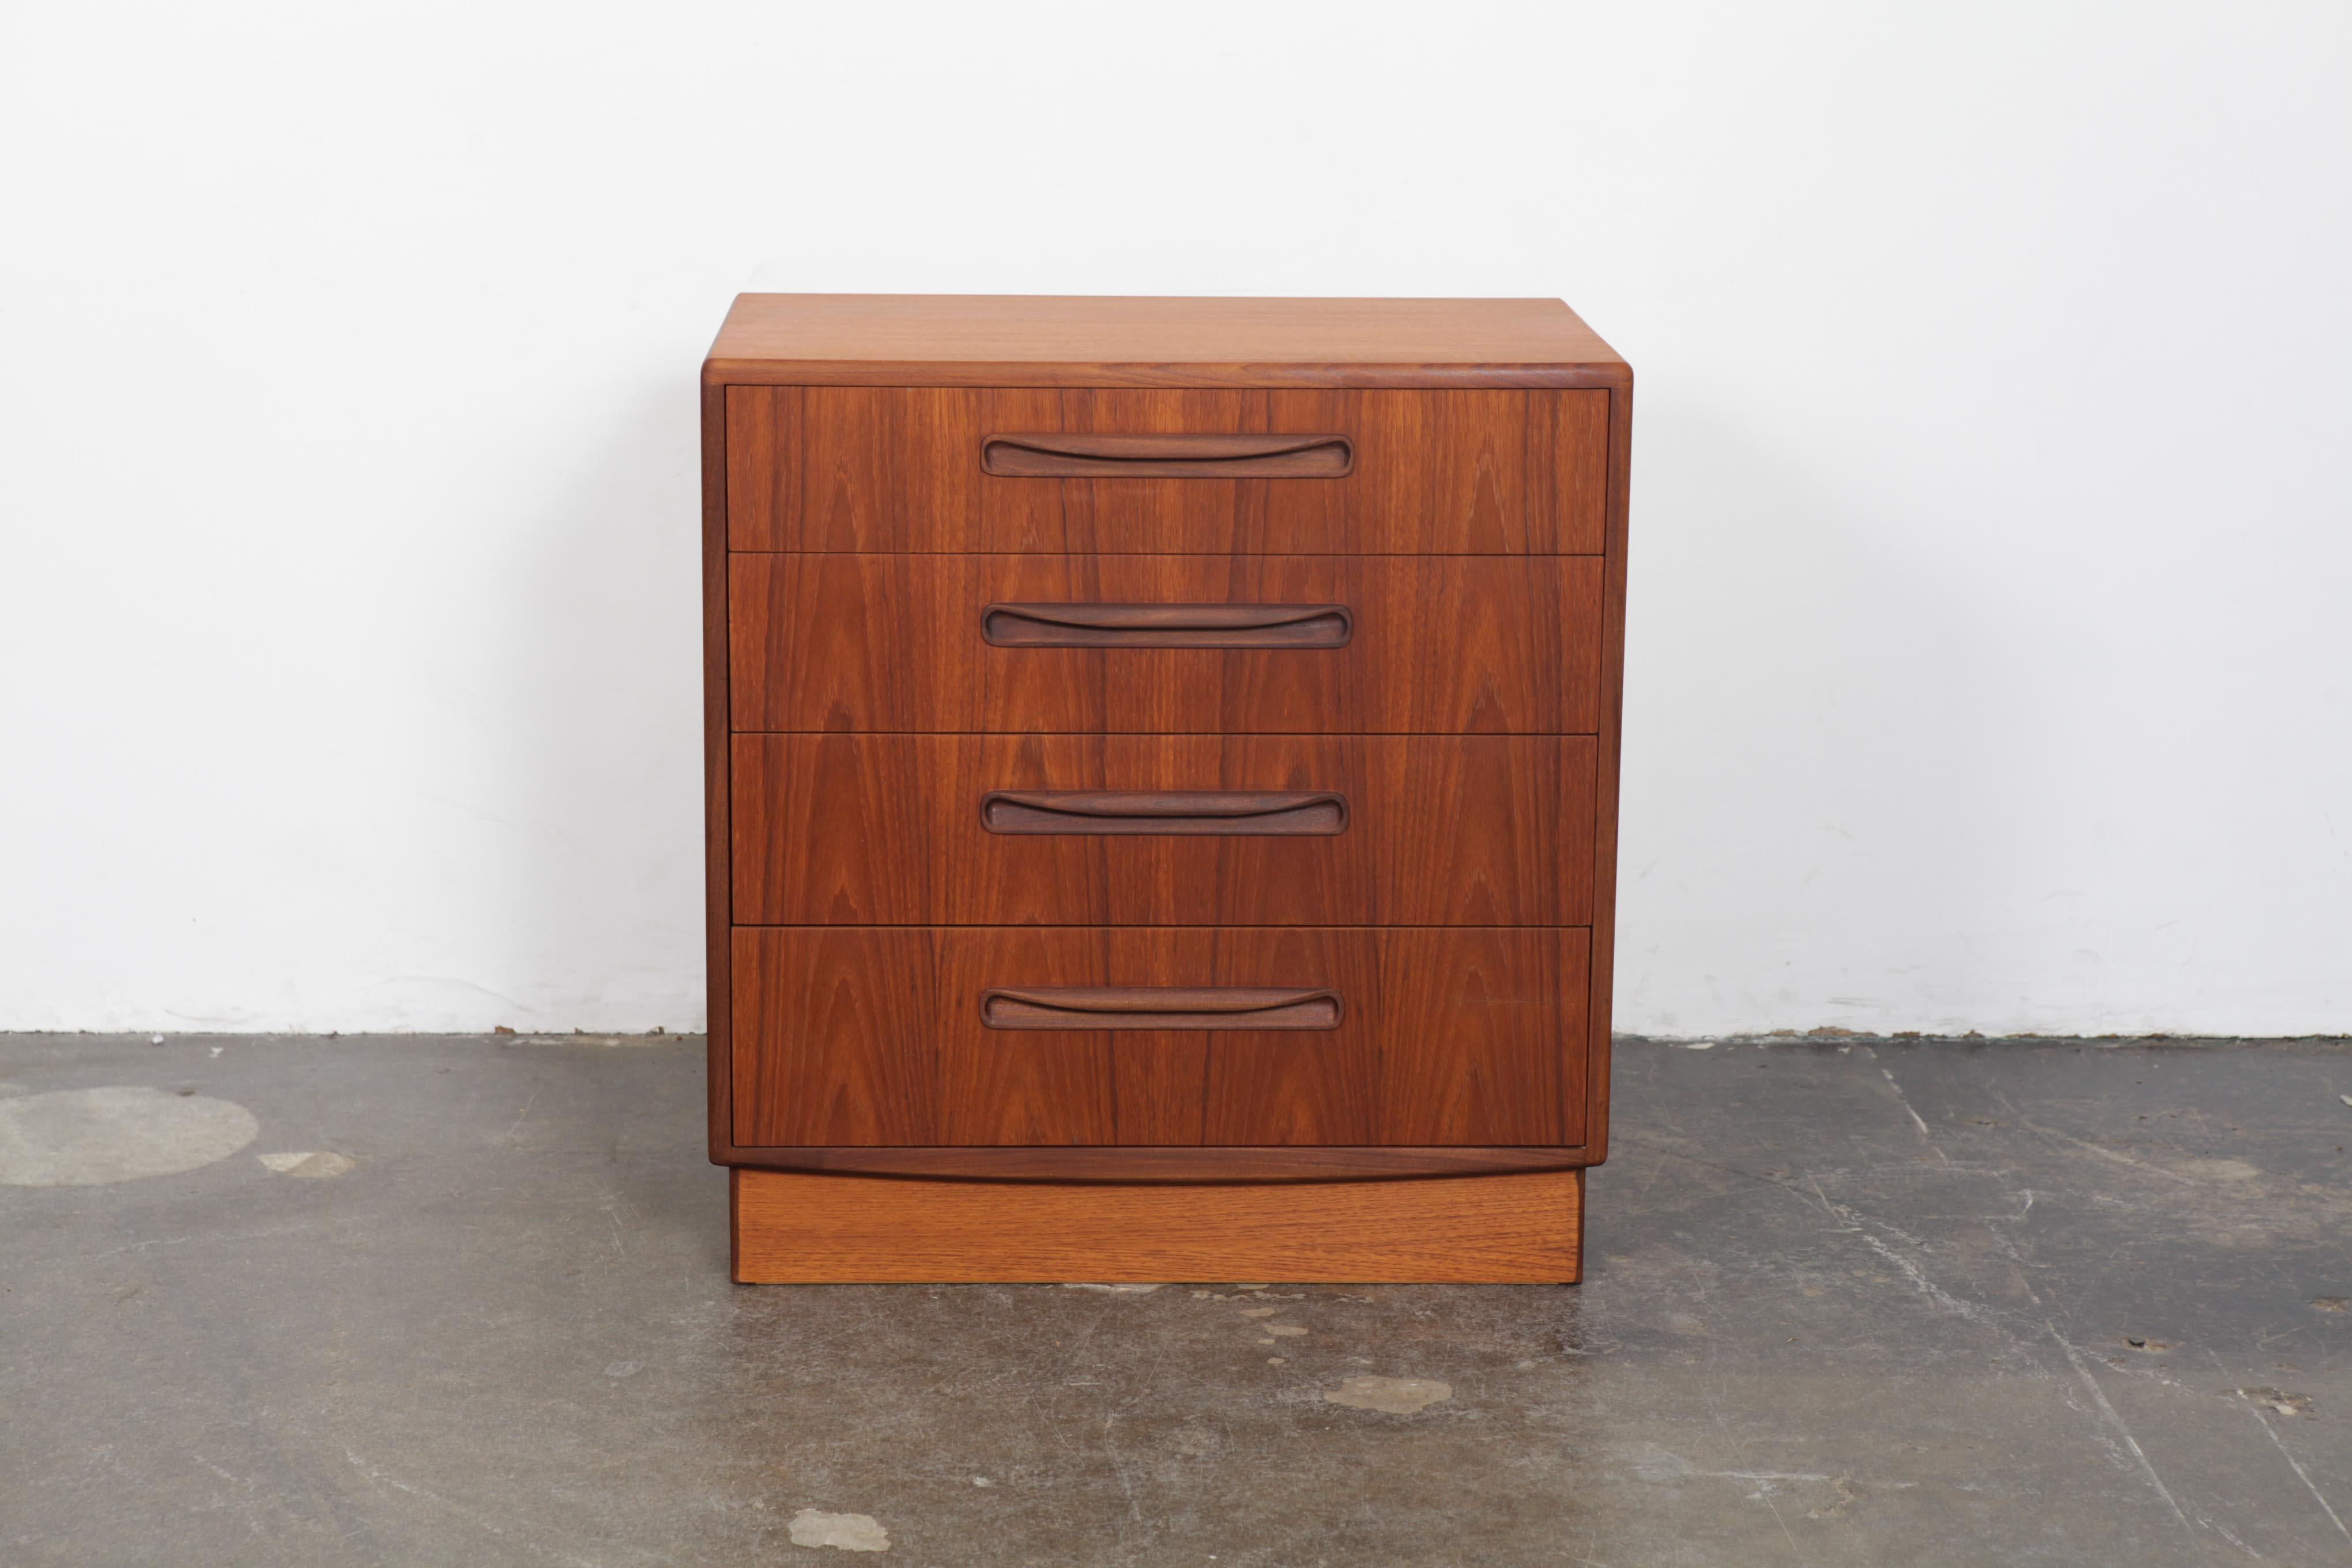 Newly refinished G Plan four-drawer teak and afromosia wood smaller dresser on a plinth base, 1960s, part of the 'Fresco' line, England. Two toned with Classic curving carved handles on a plinth base, designed by VB Wilkins.